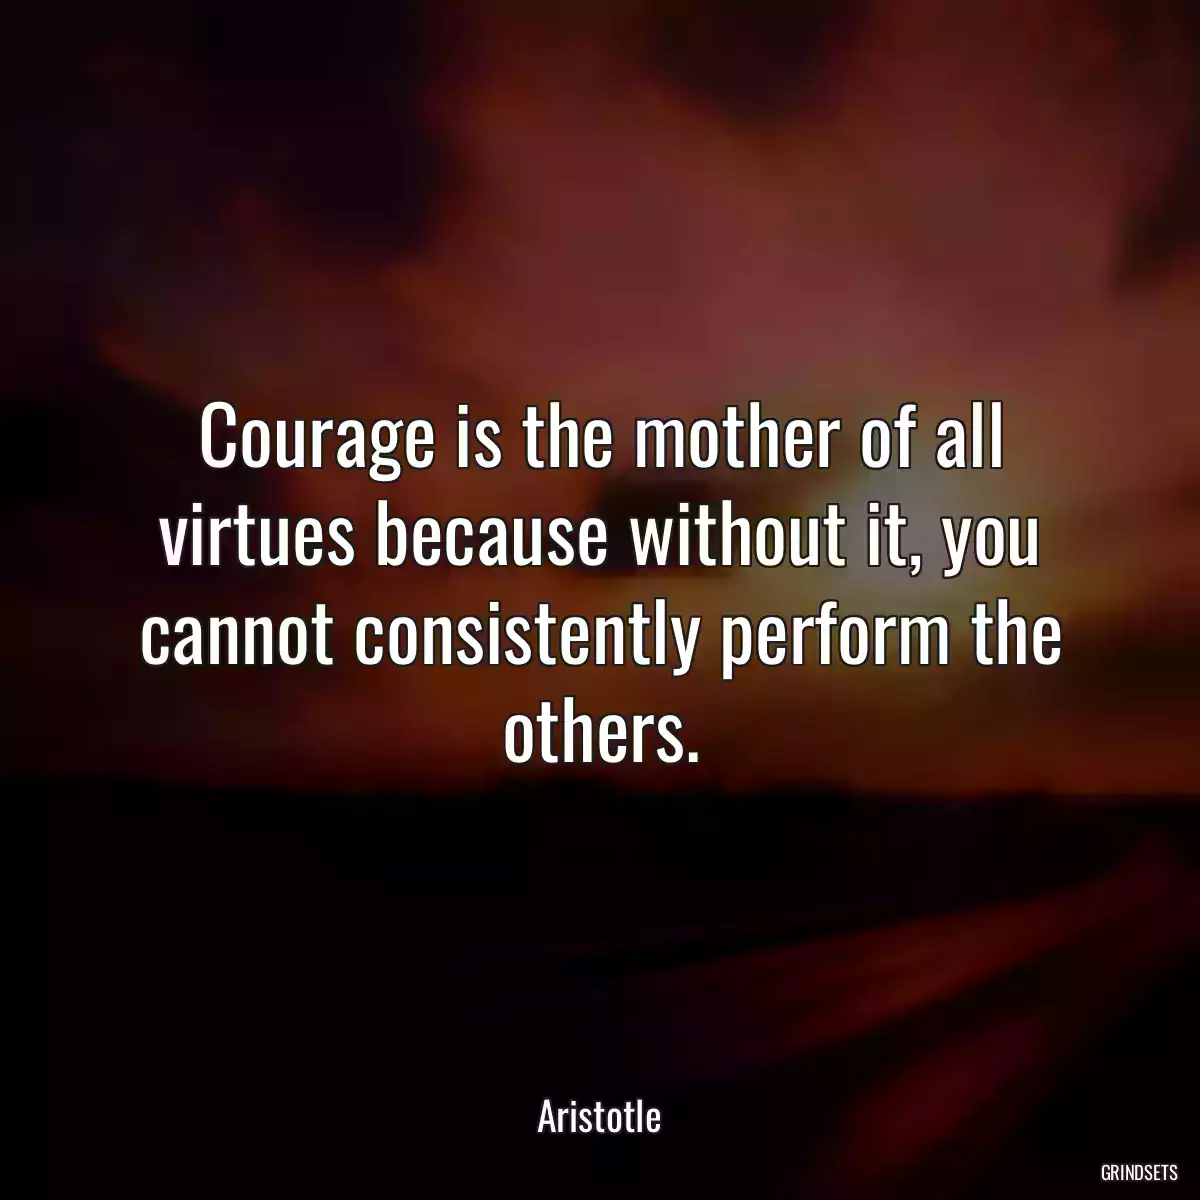 Courage is the mother of all virtues because without it, you cannot consistently perform the others.